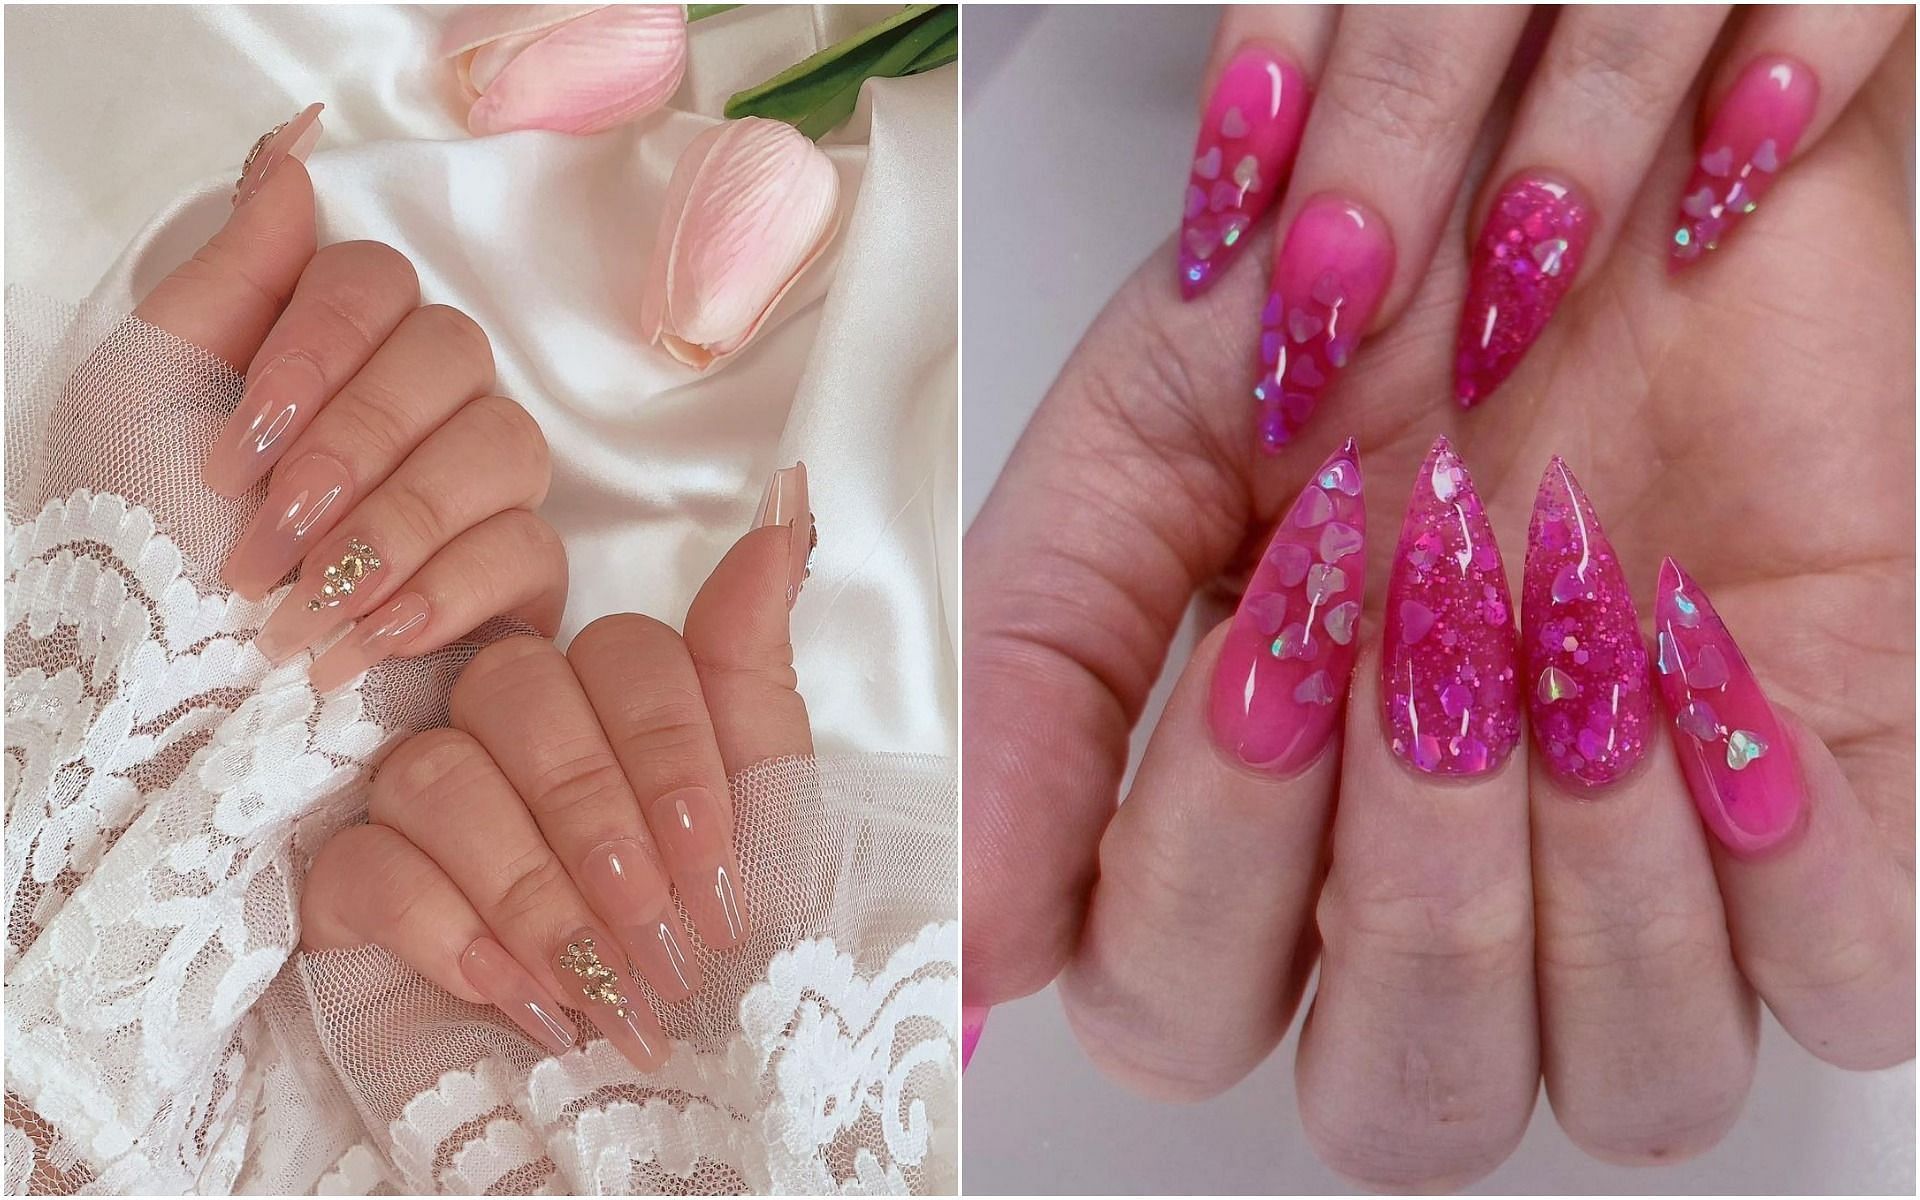 What are jelly nails? Recommended products, price, and how to take part in  the viral TikTok trend revealed